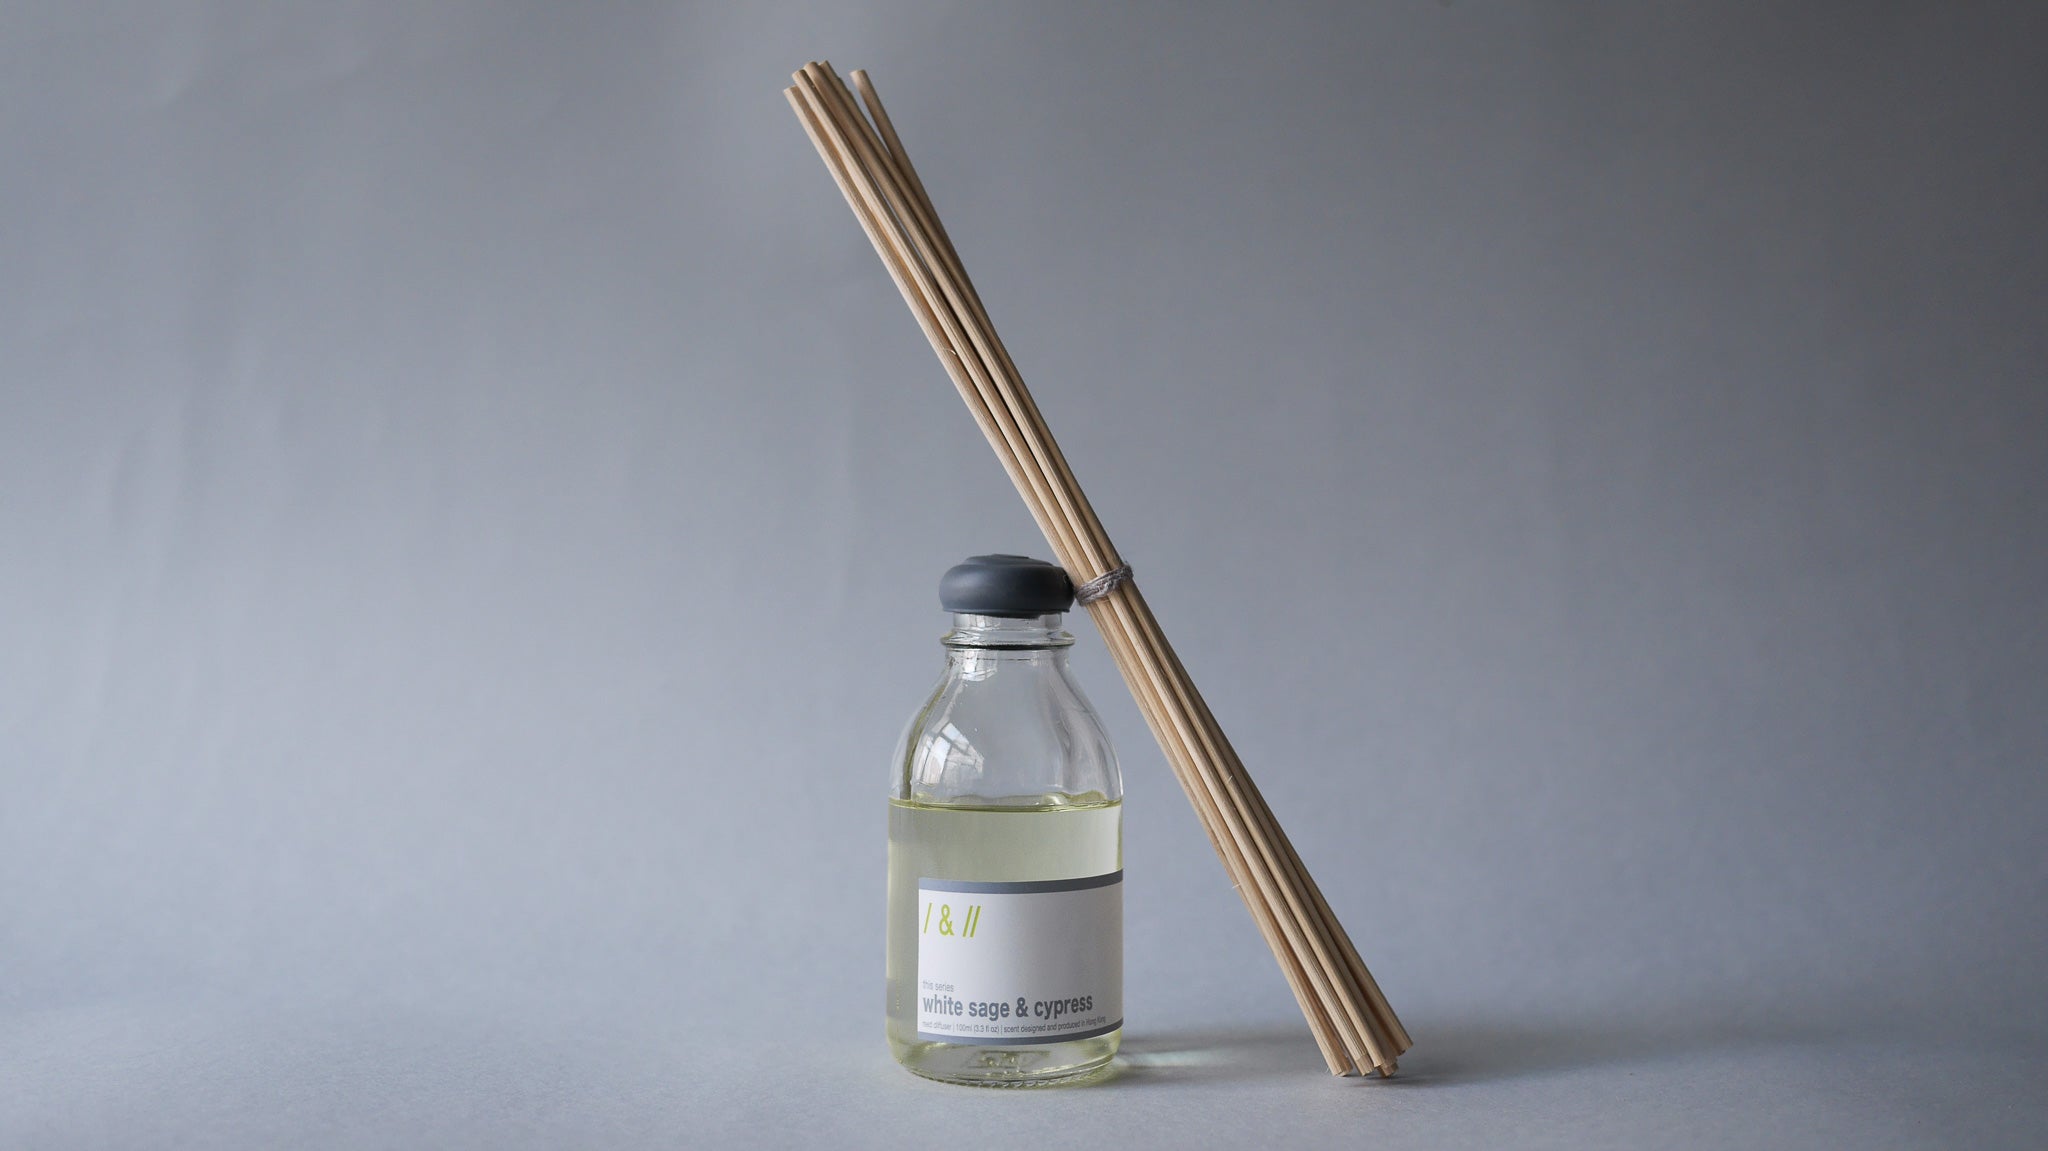 white sage & cypress / reed diffuser 100ml & 200ml // this series